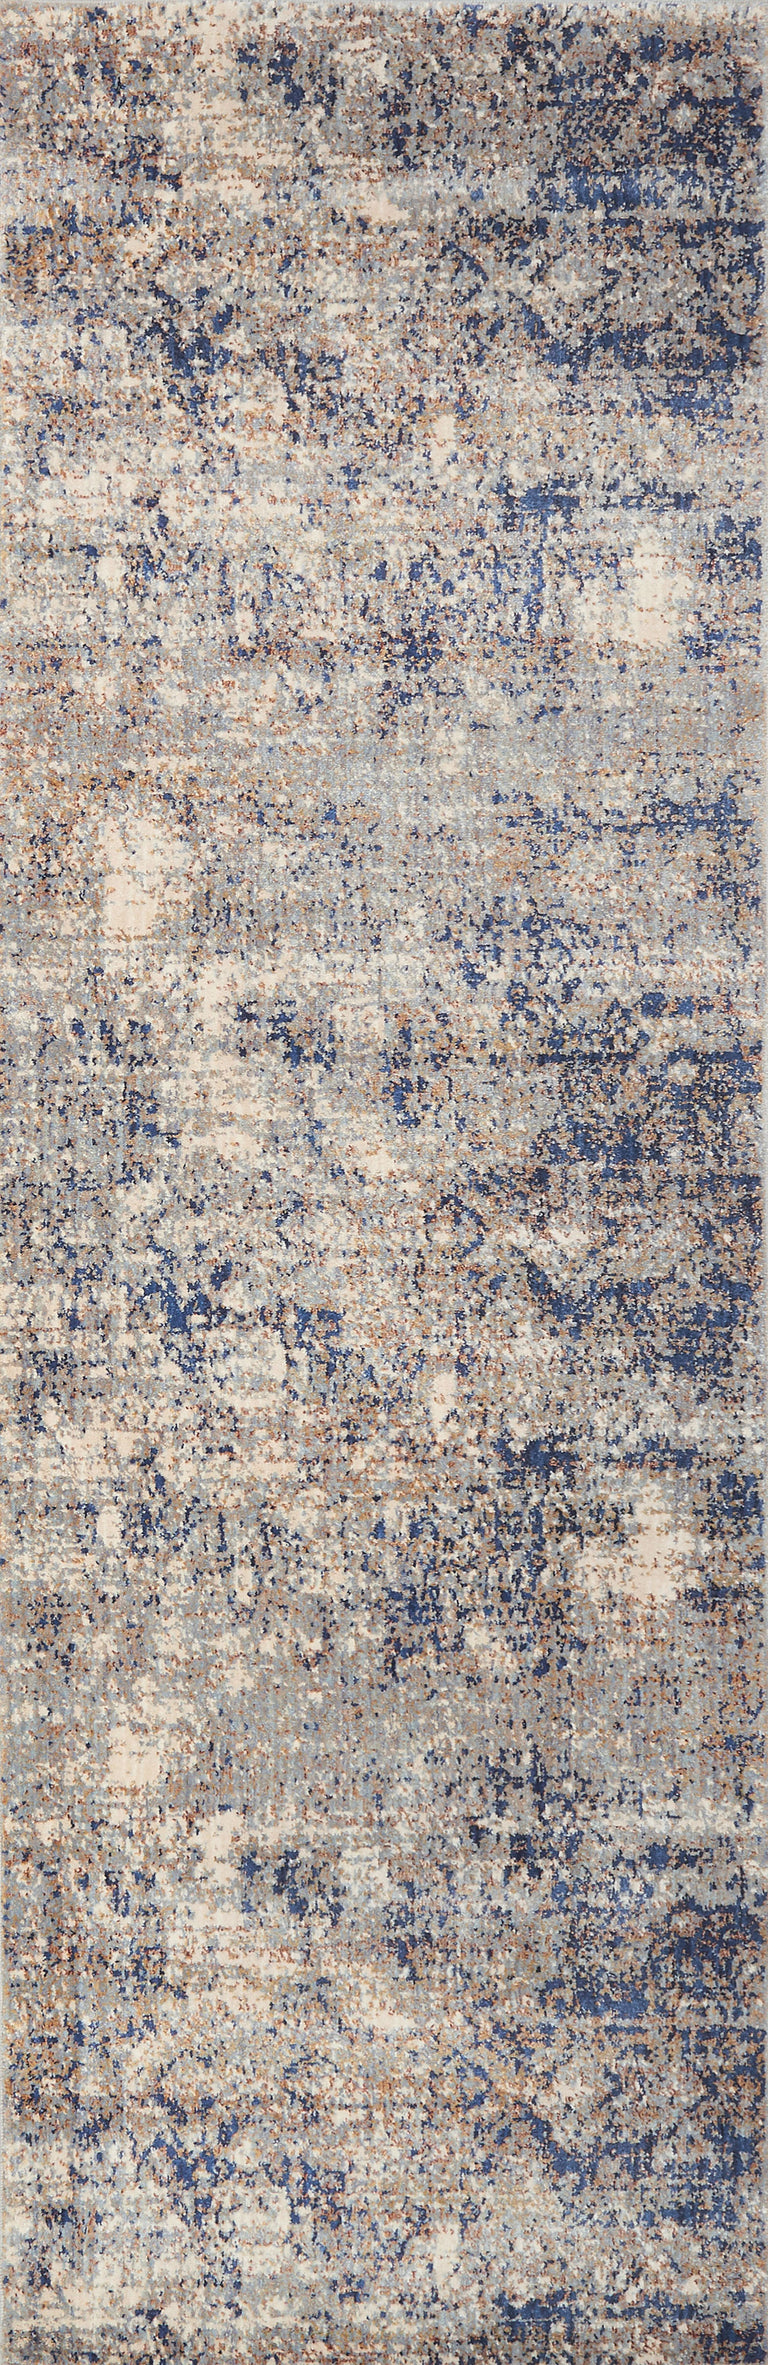 Loloi Rugs Anastasia Collection Rug in Mist, Blue - 7'10" x 7'10"